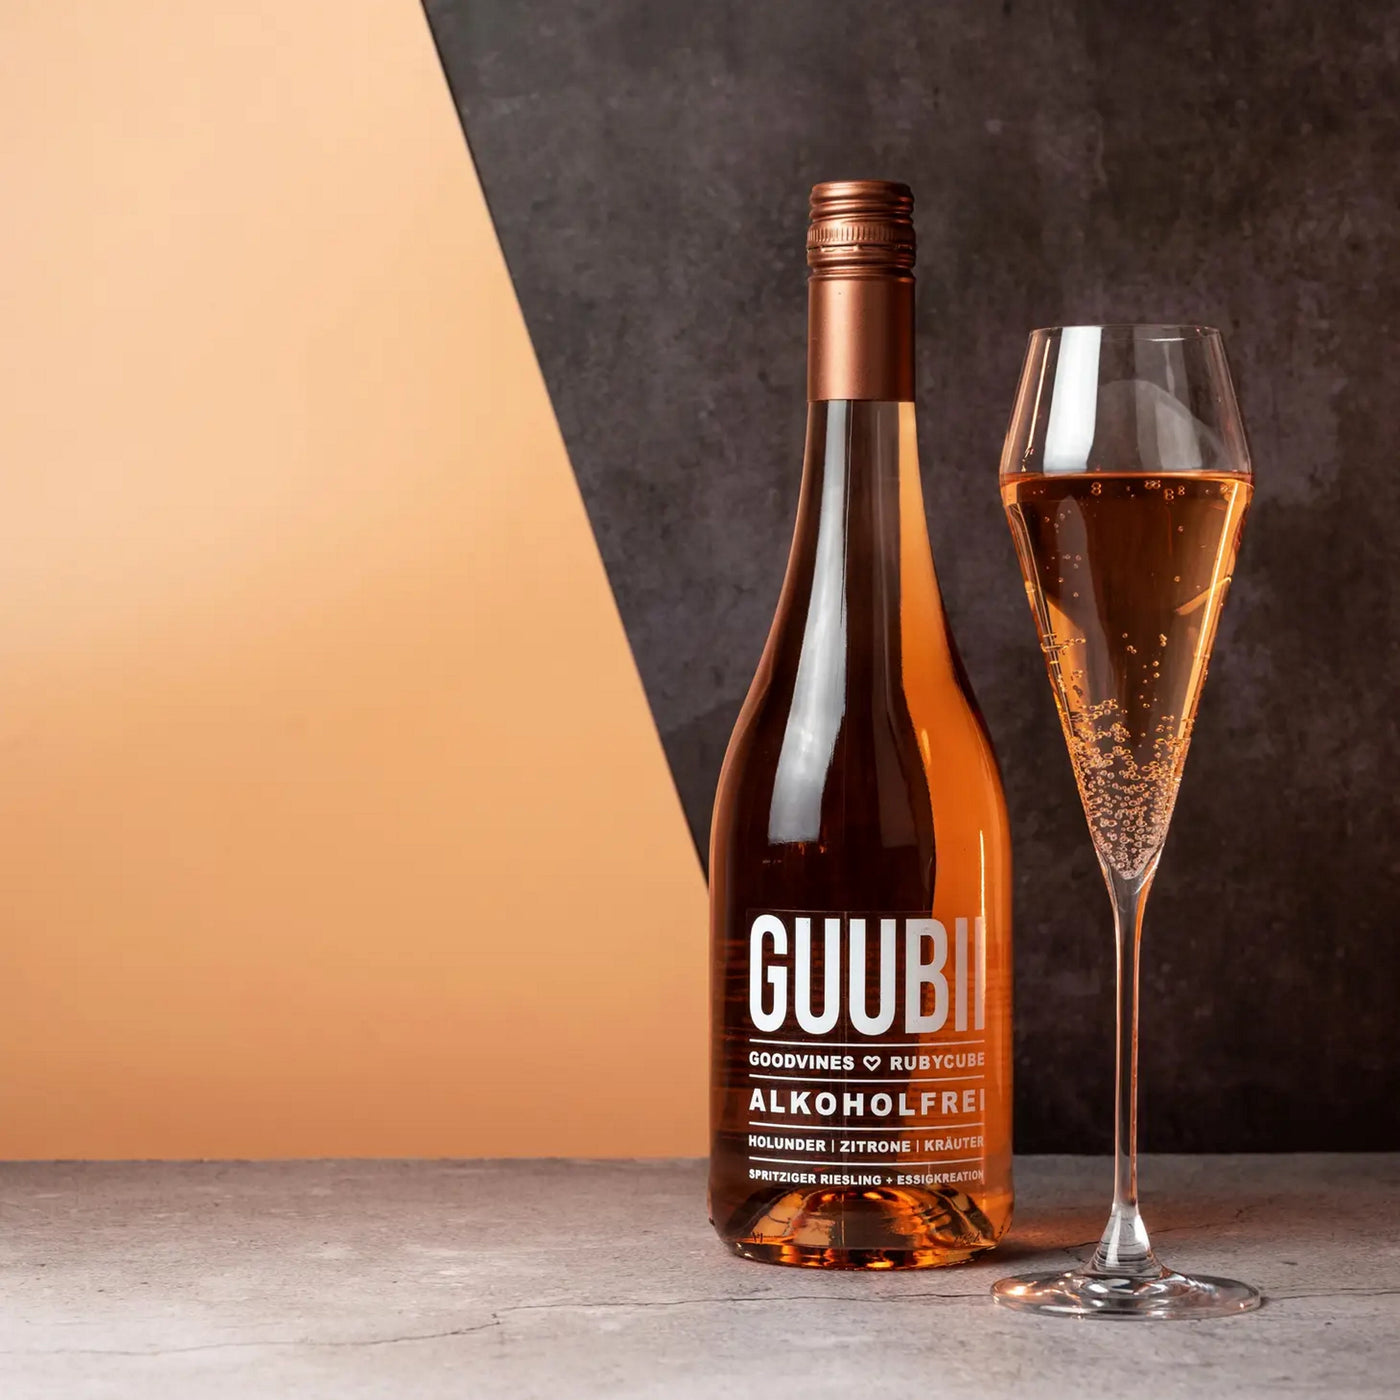 Guubi - goodvines, rubycube Canada - alcohol free beverages that taste good